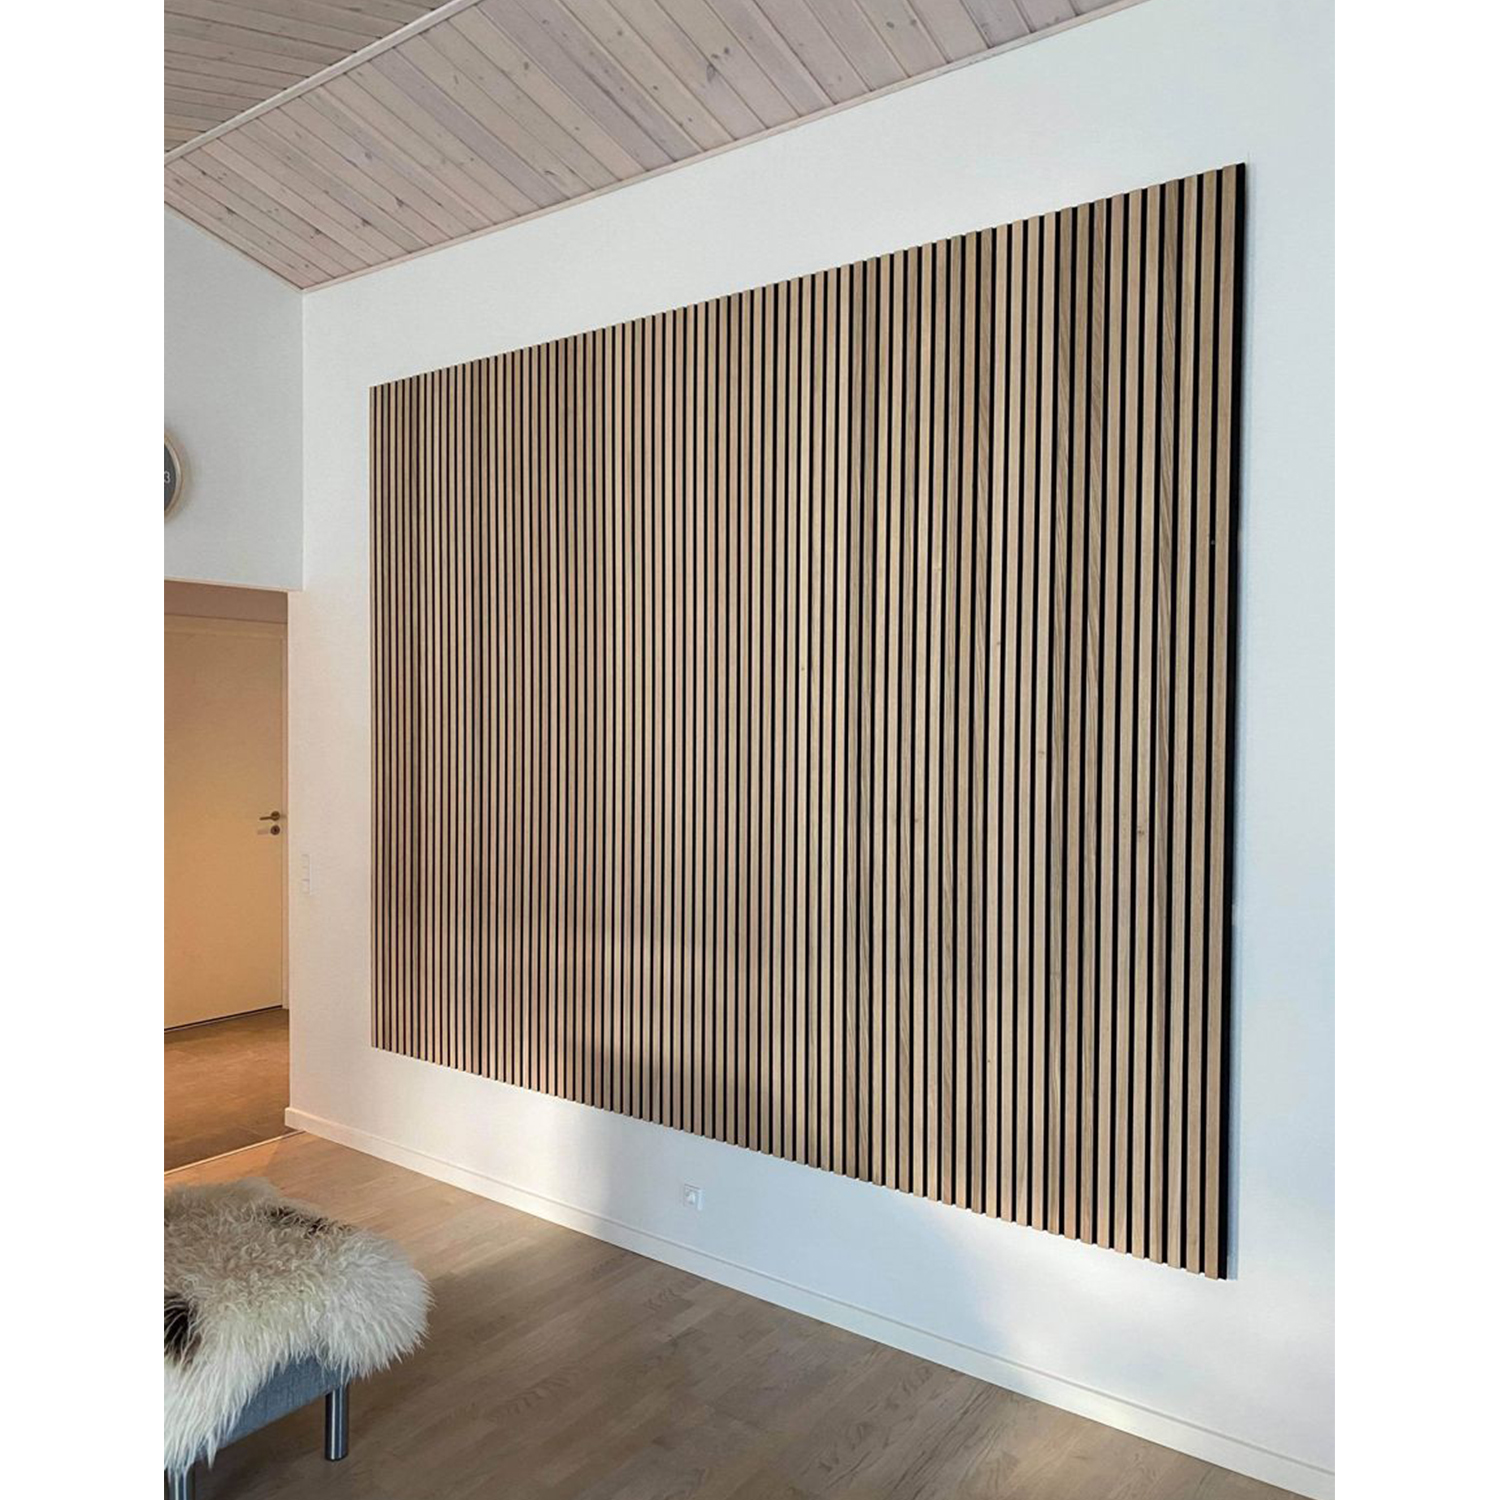 Wooden Sound-Absorbing Acoustic Polyester Slat Wall